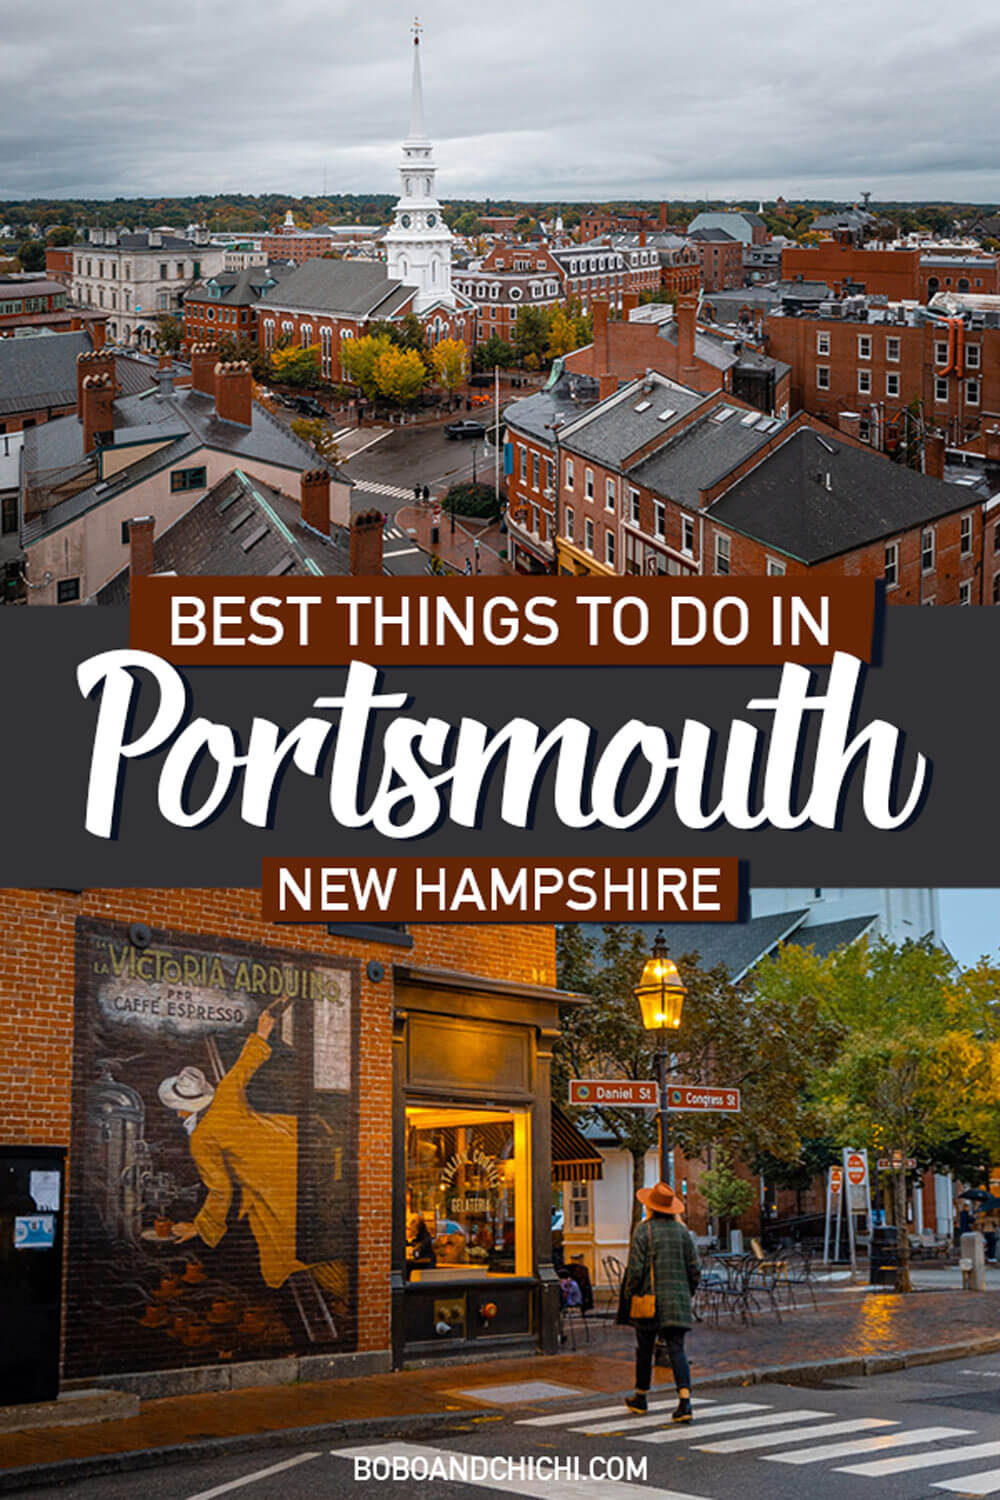 portsmouth-nh-attractions